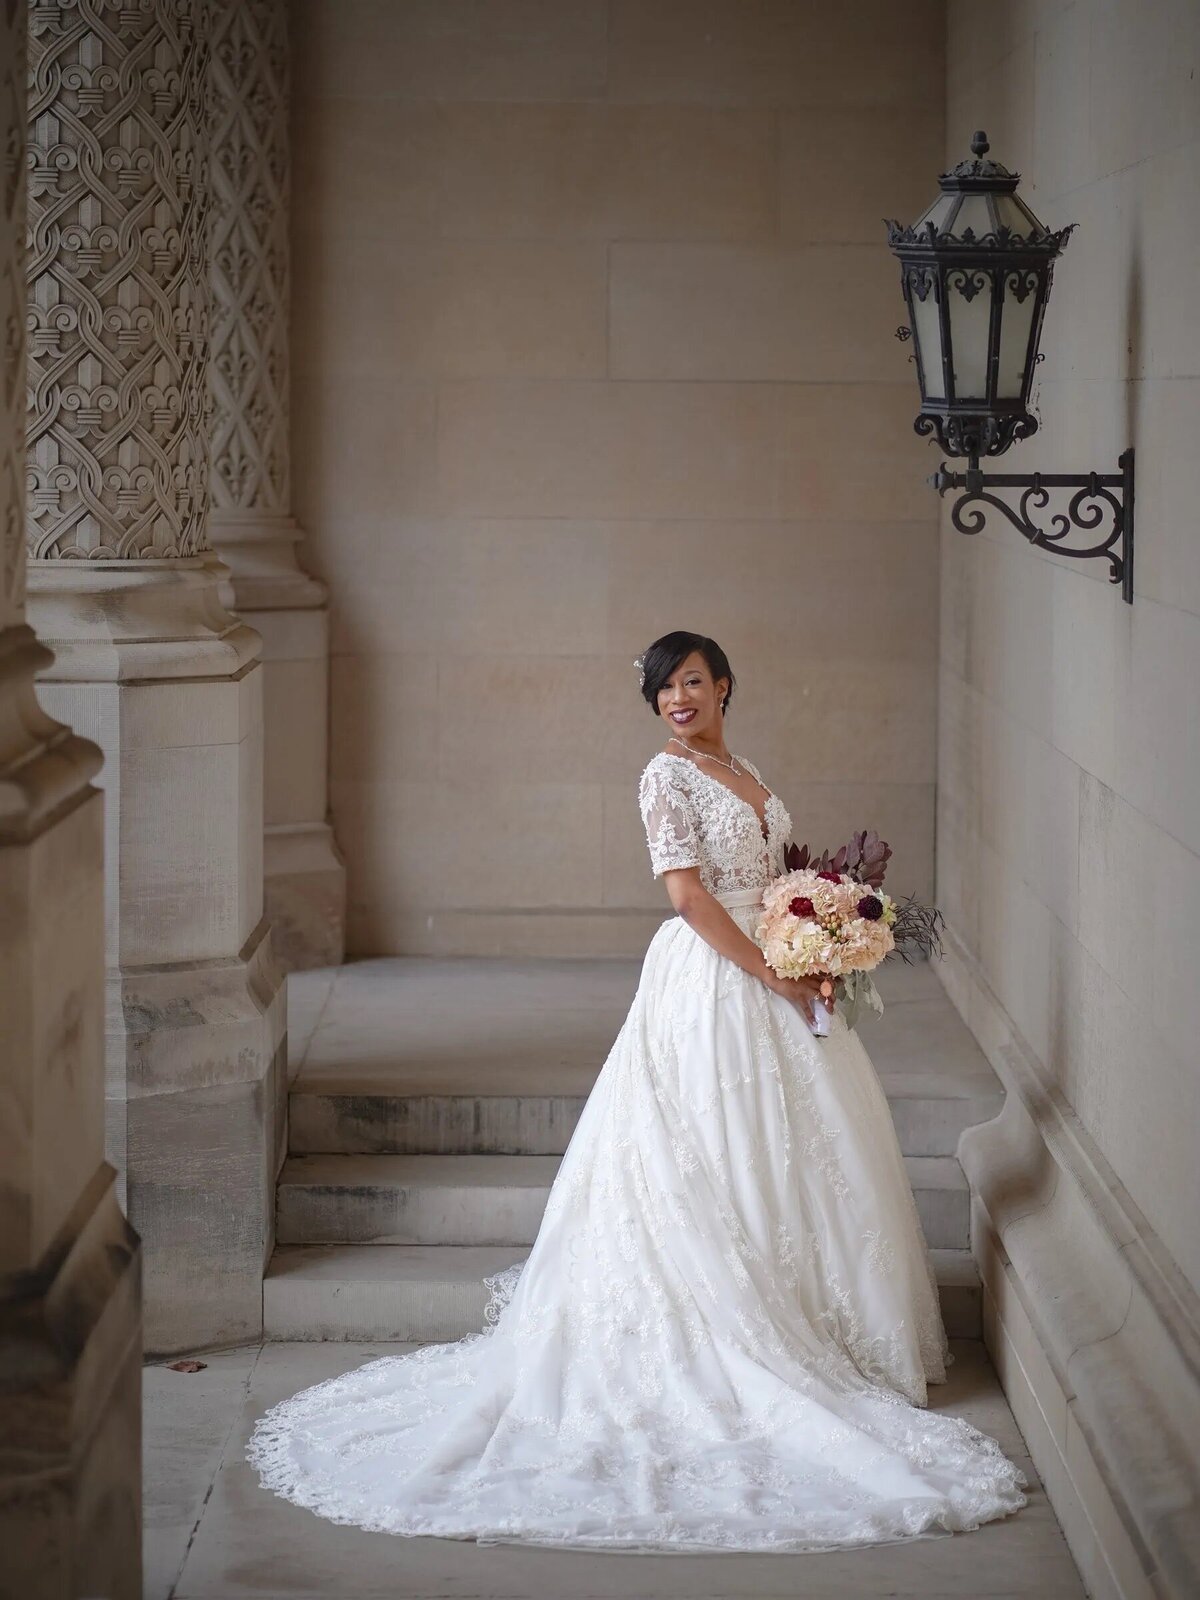 A bride standing in front of a small staircase holding a bouquet of flowers